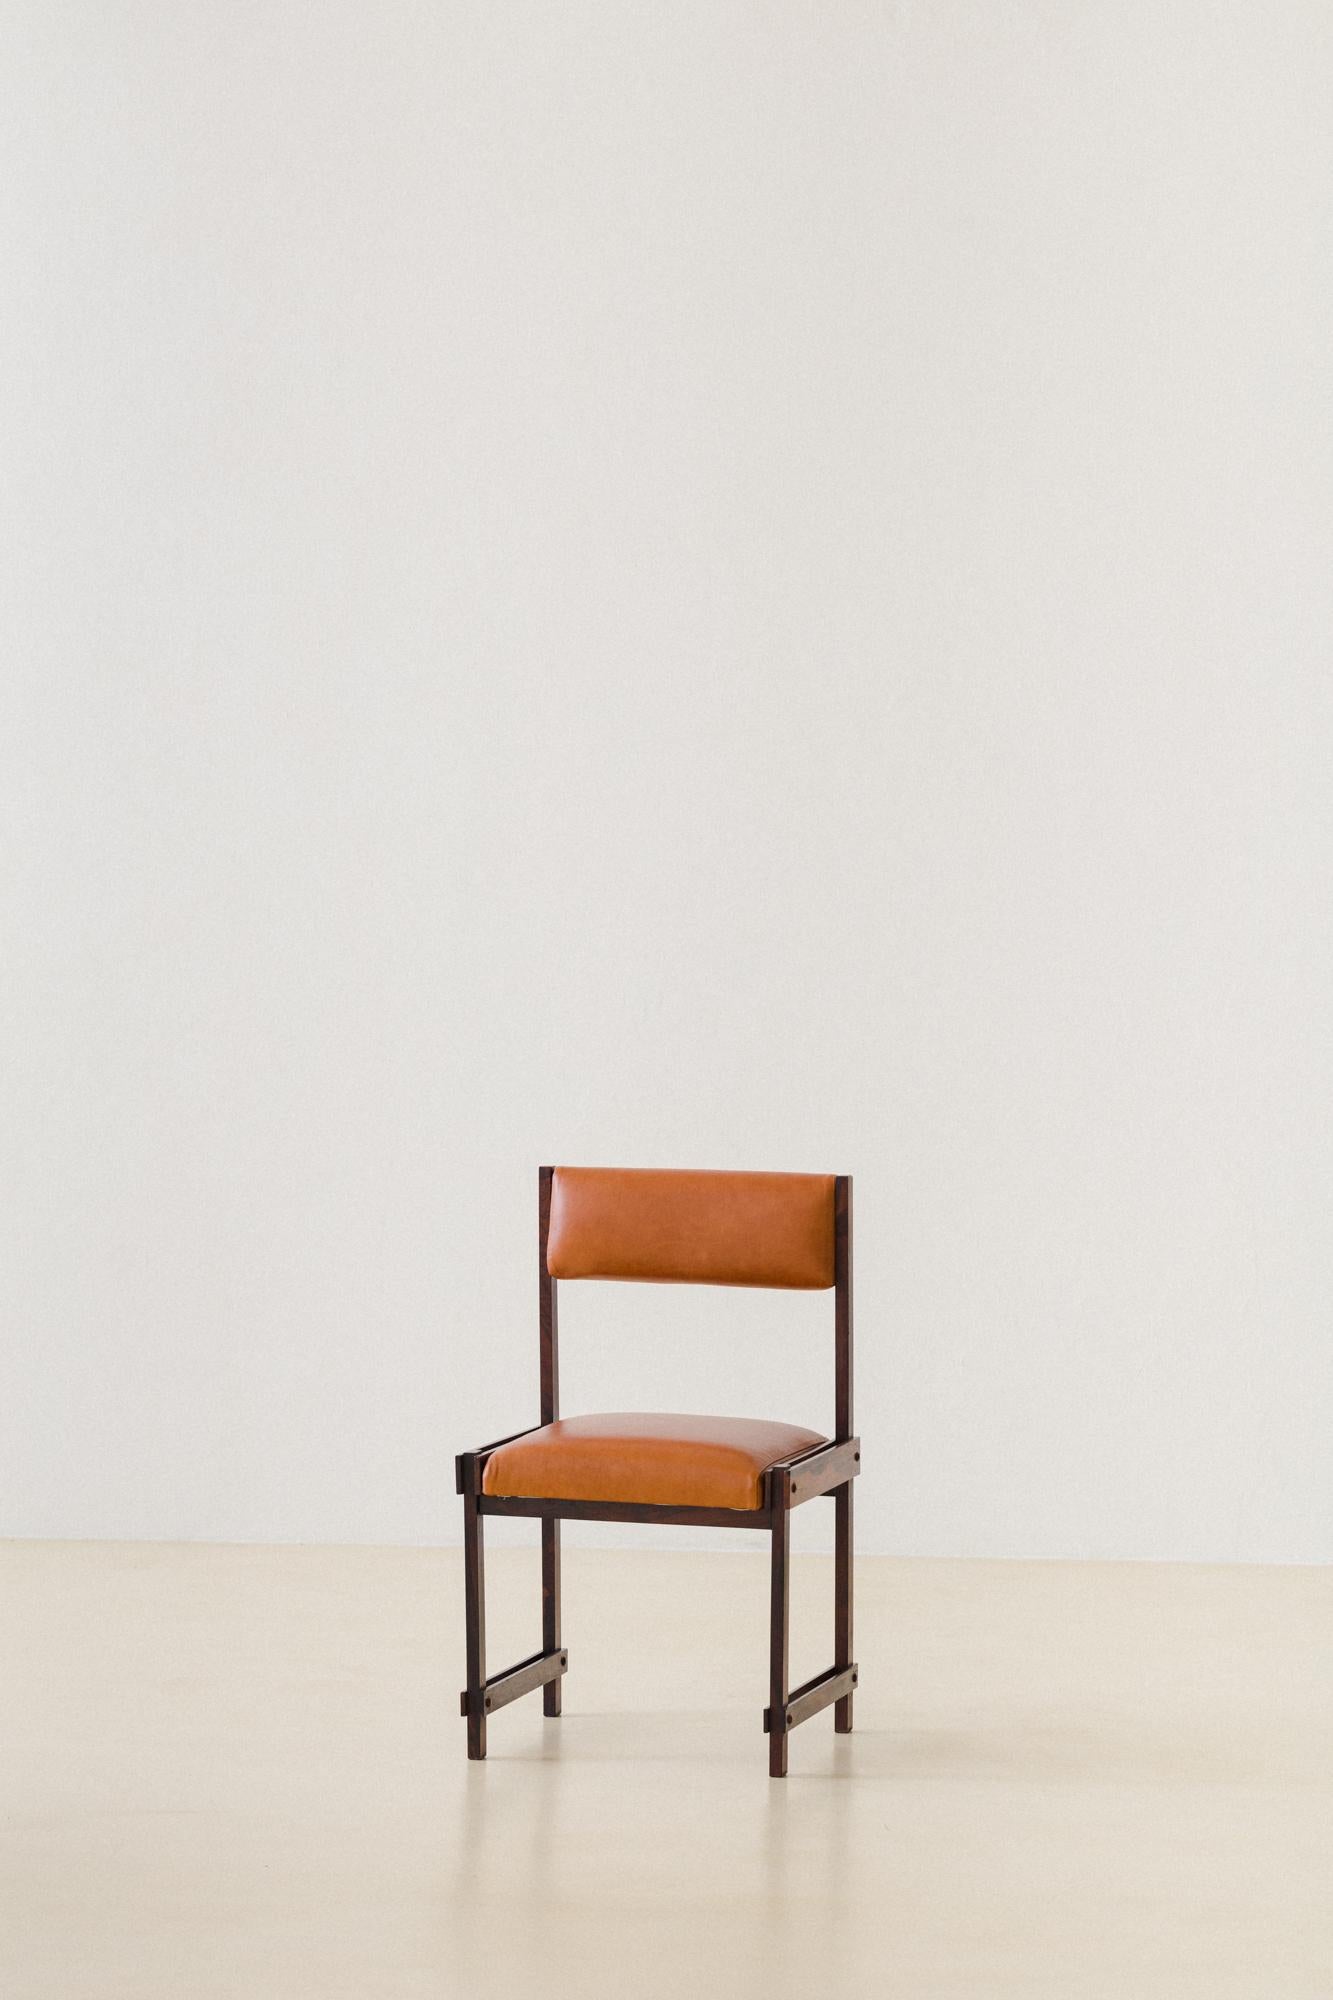 Brazilian Rosewood Dining Chairs by FAI 'Fatima Arquitetura Interiores', 1960s In Good Condition For Sale In New York, NY